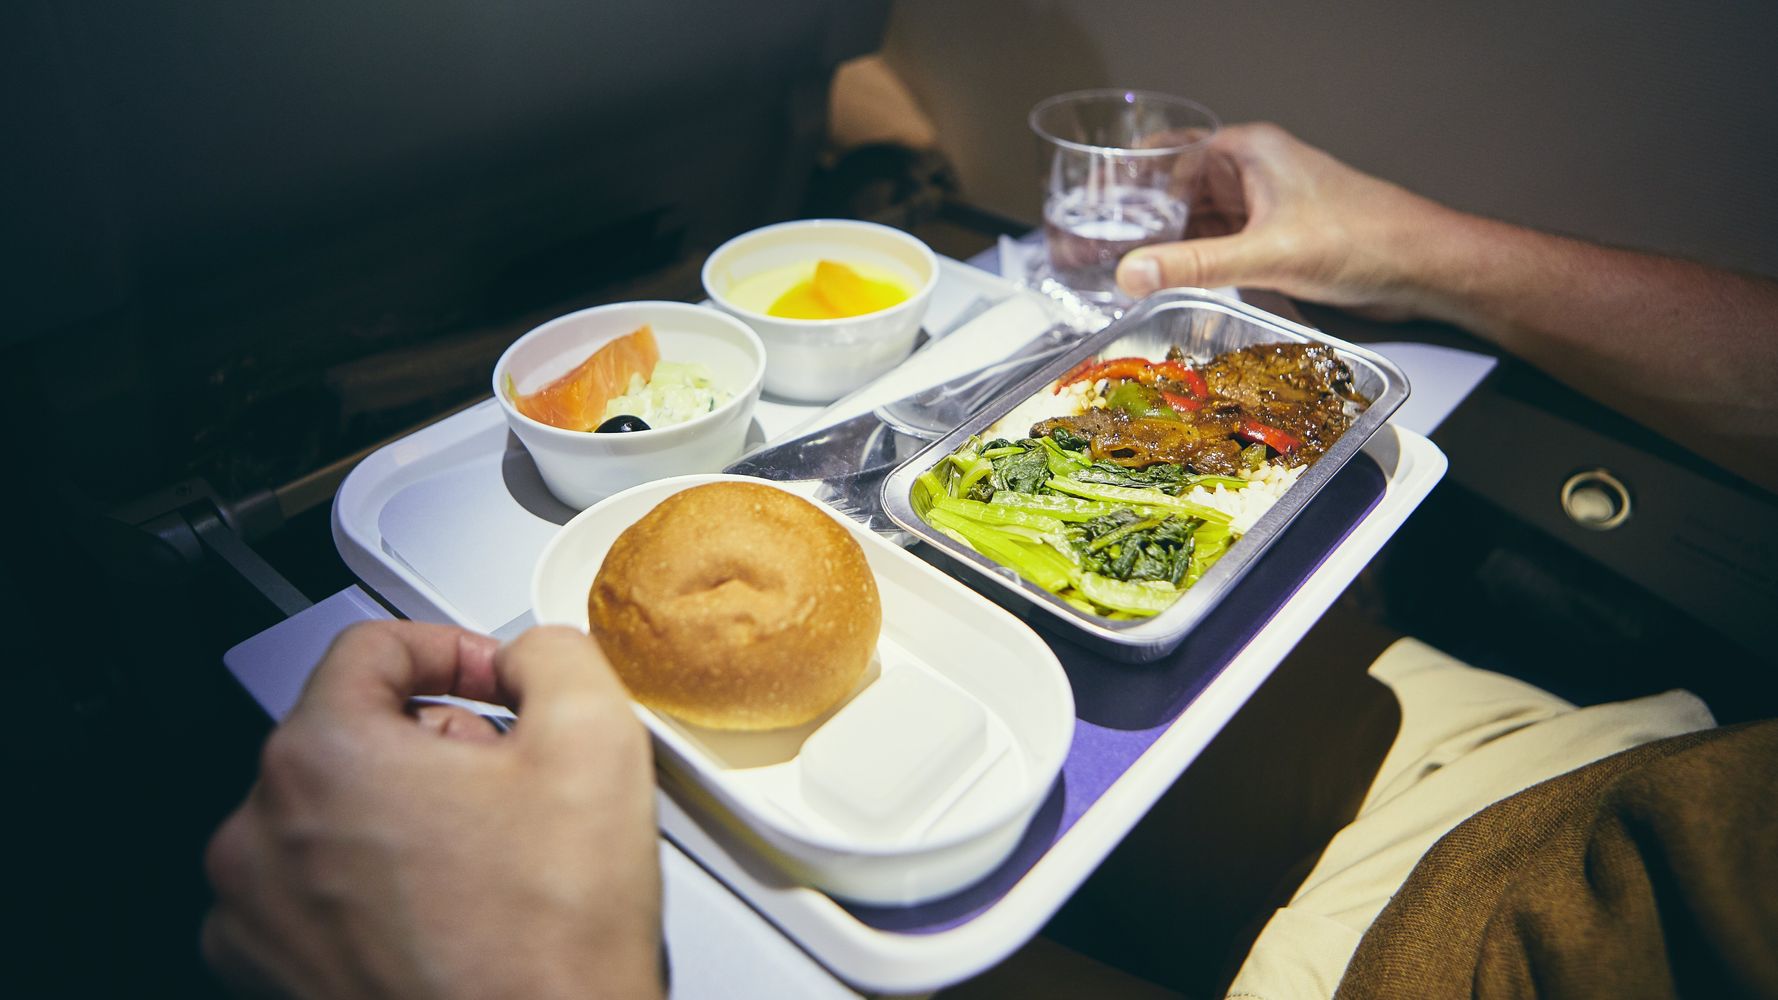 This plastic-free edible food tray is designed to reduce airline